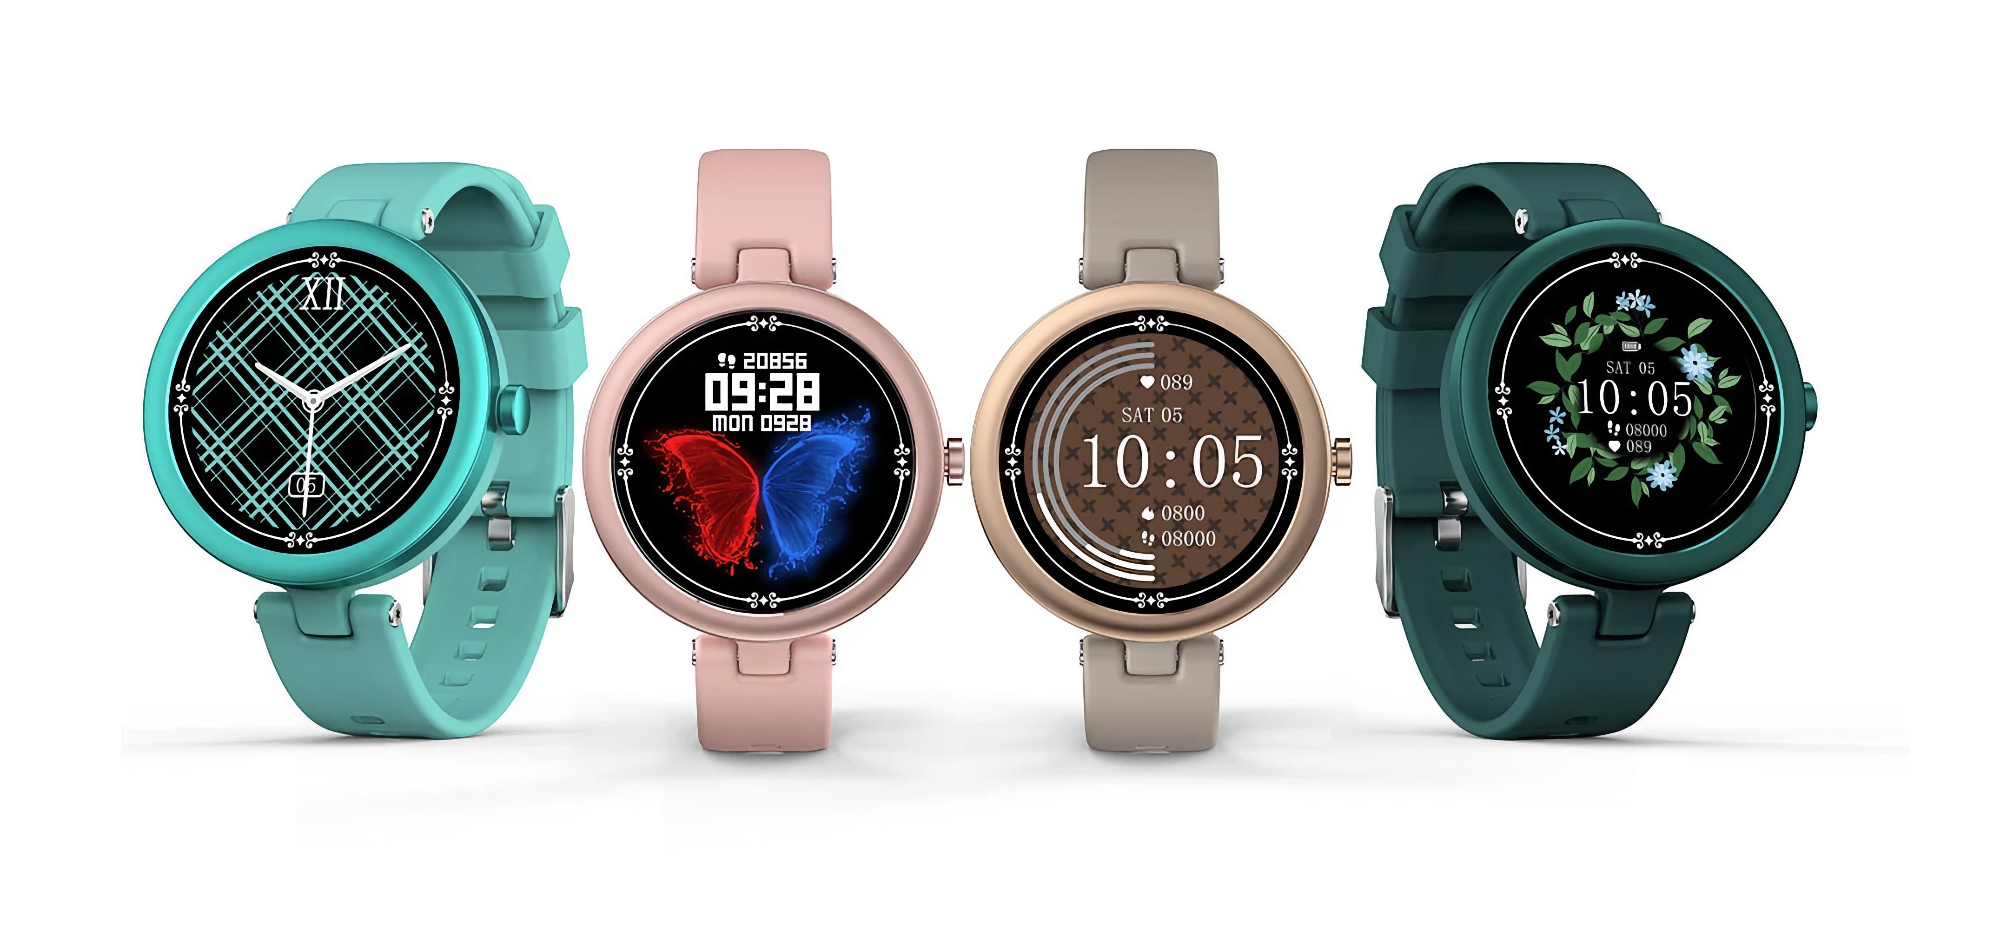 Doogee announces DG Venus: women's smartwatch with up to 7 days autonomy and a price tag of $ 50